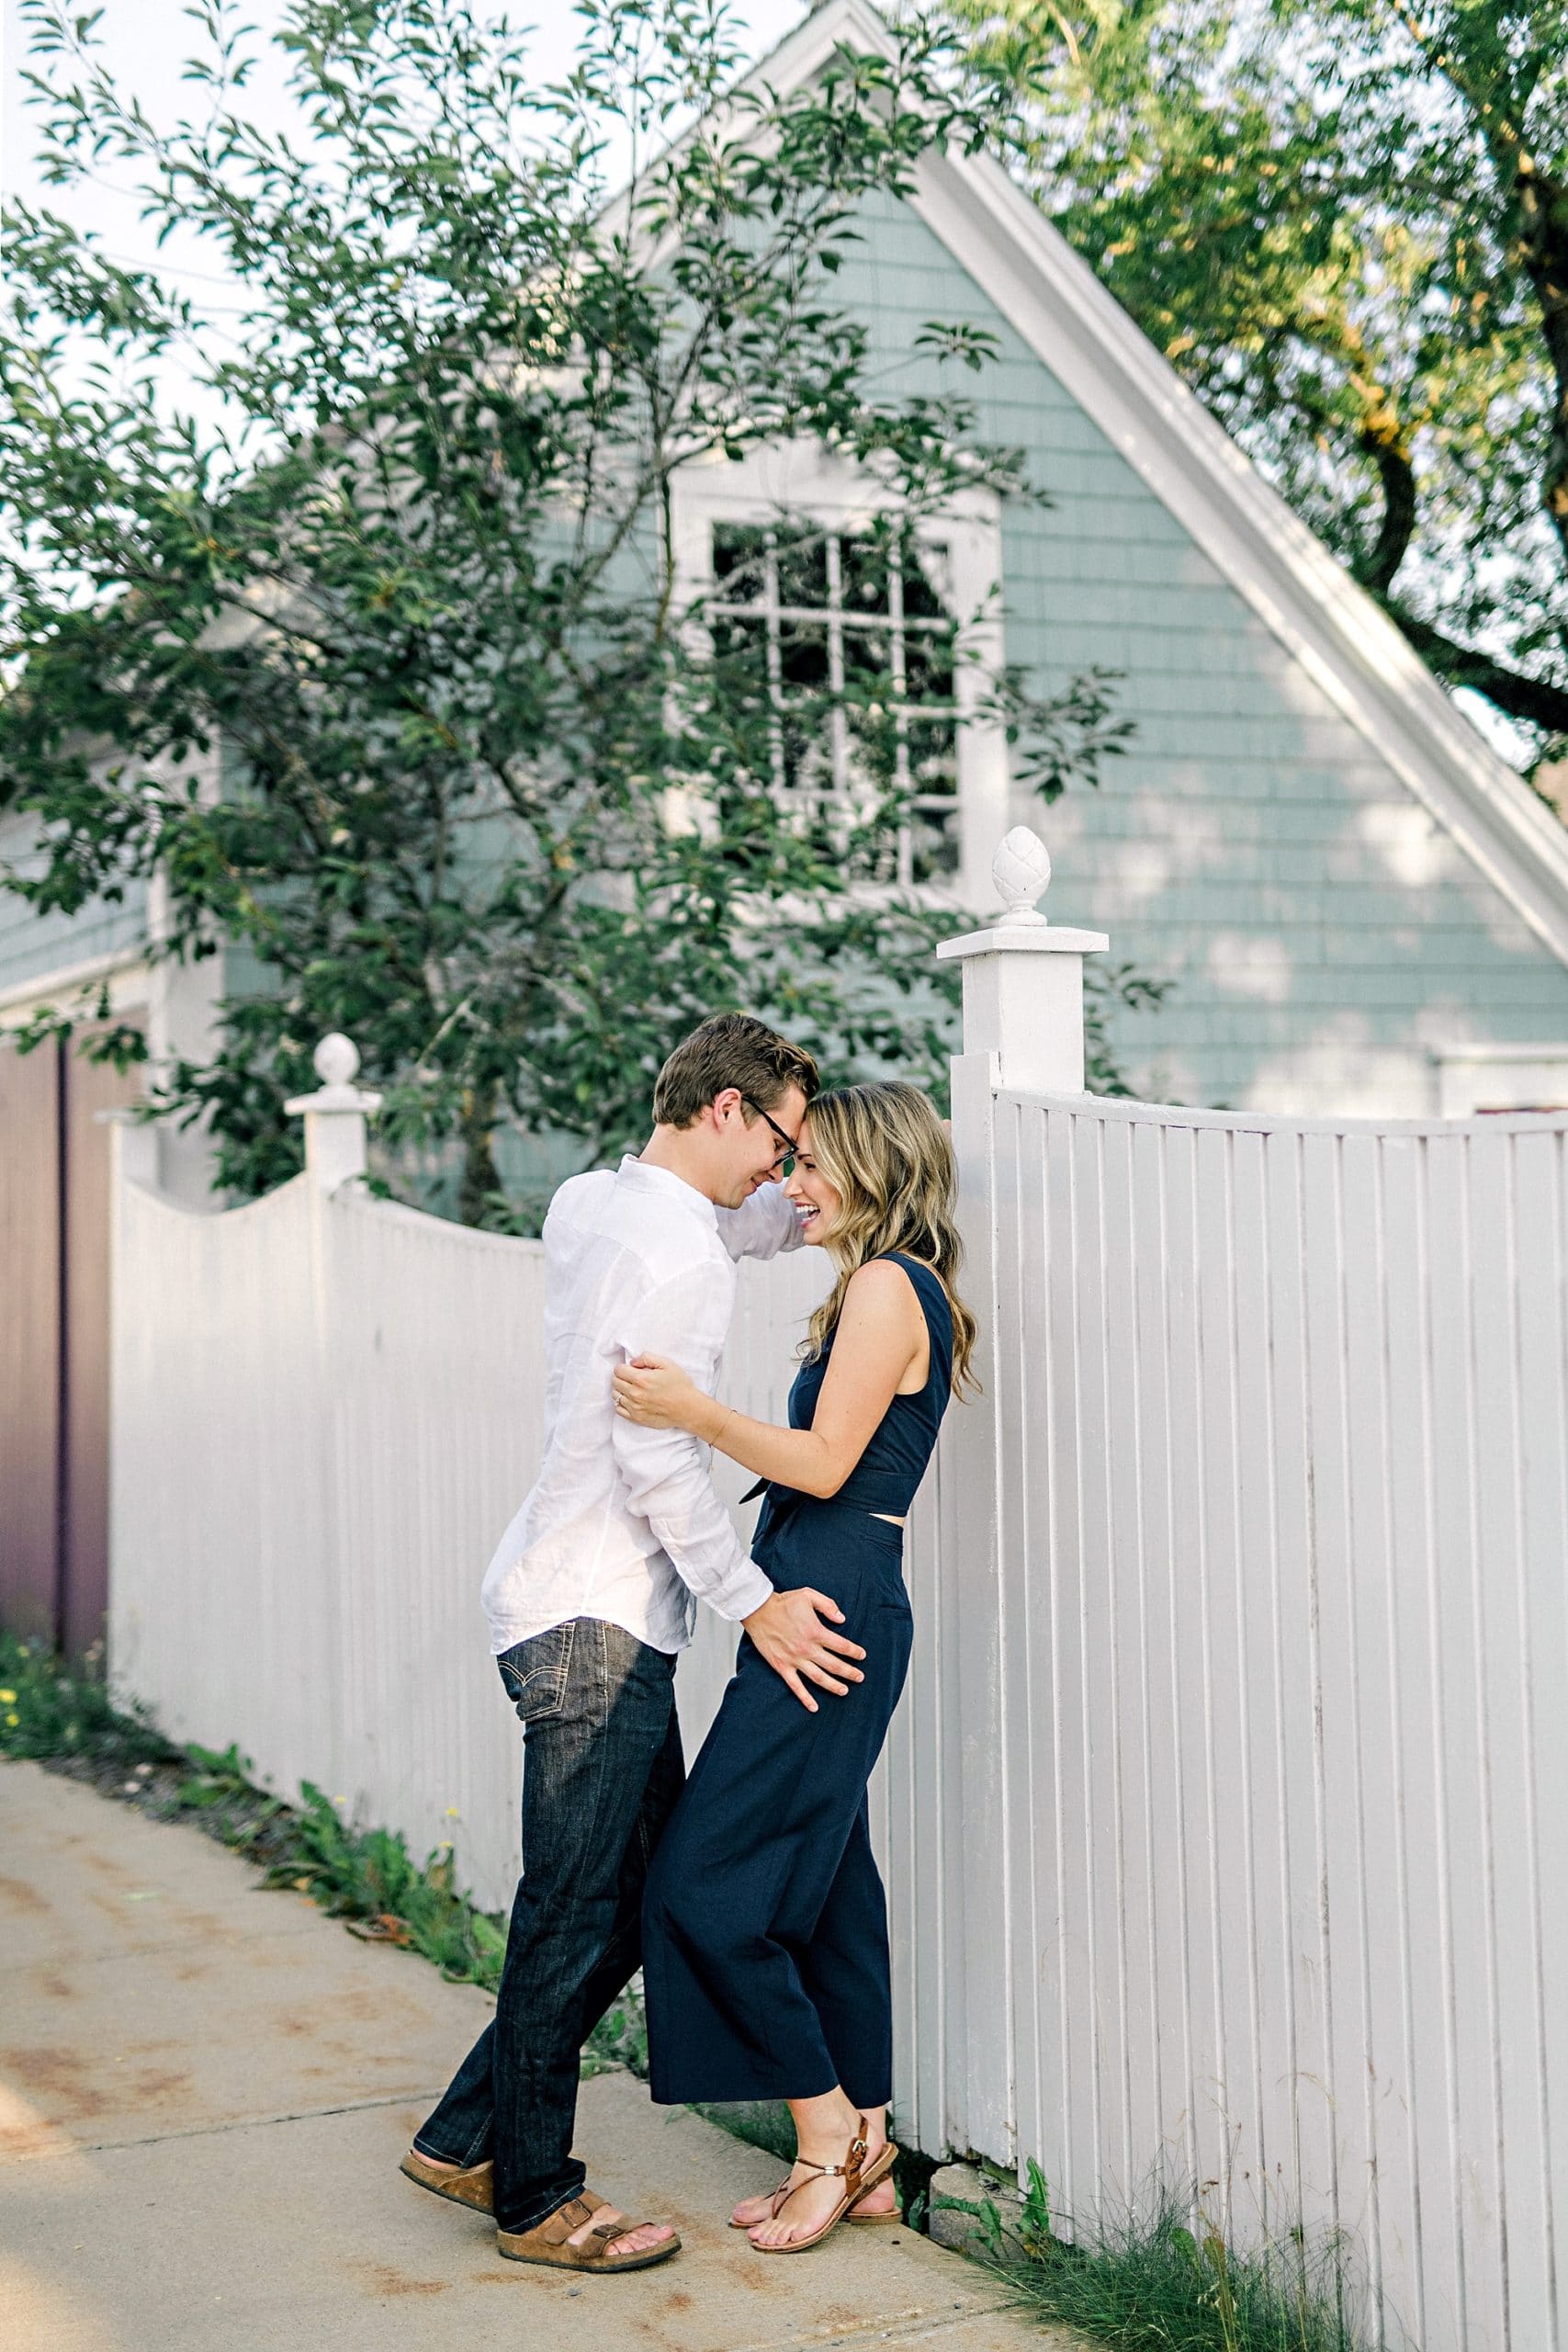 couple in quaint seaside village embracing against white picket fence